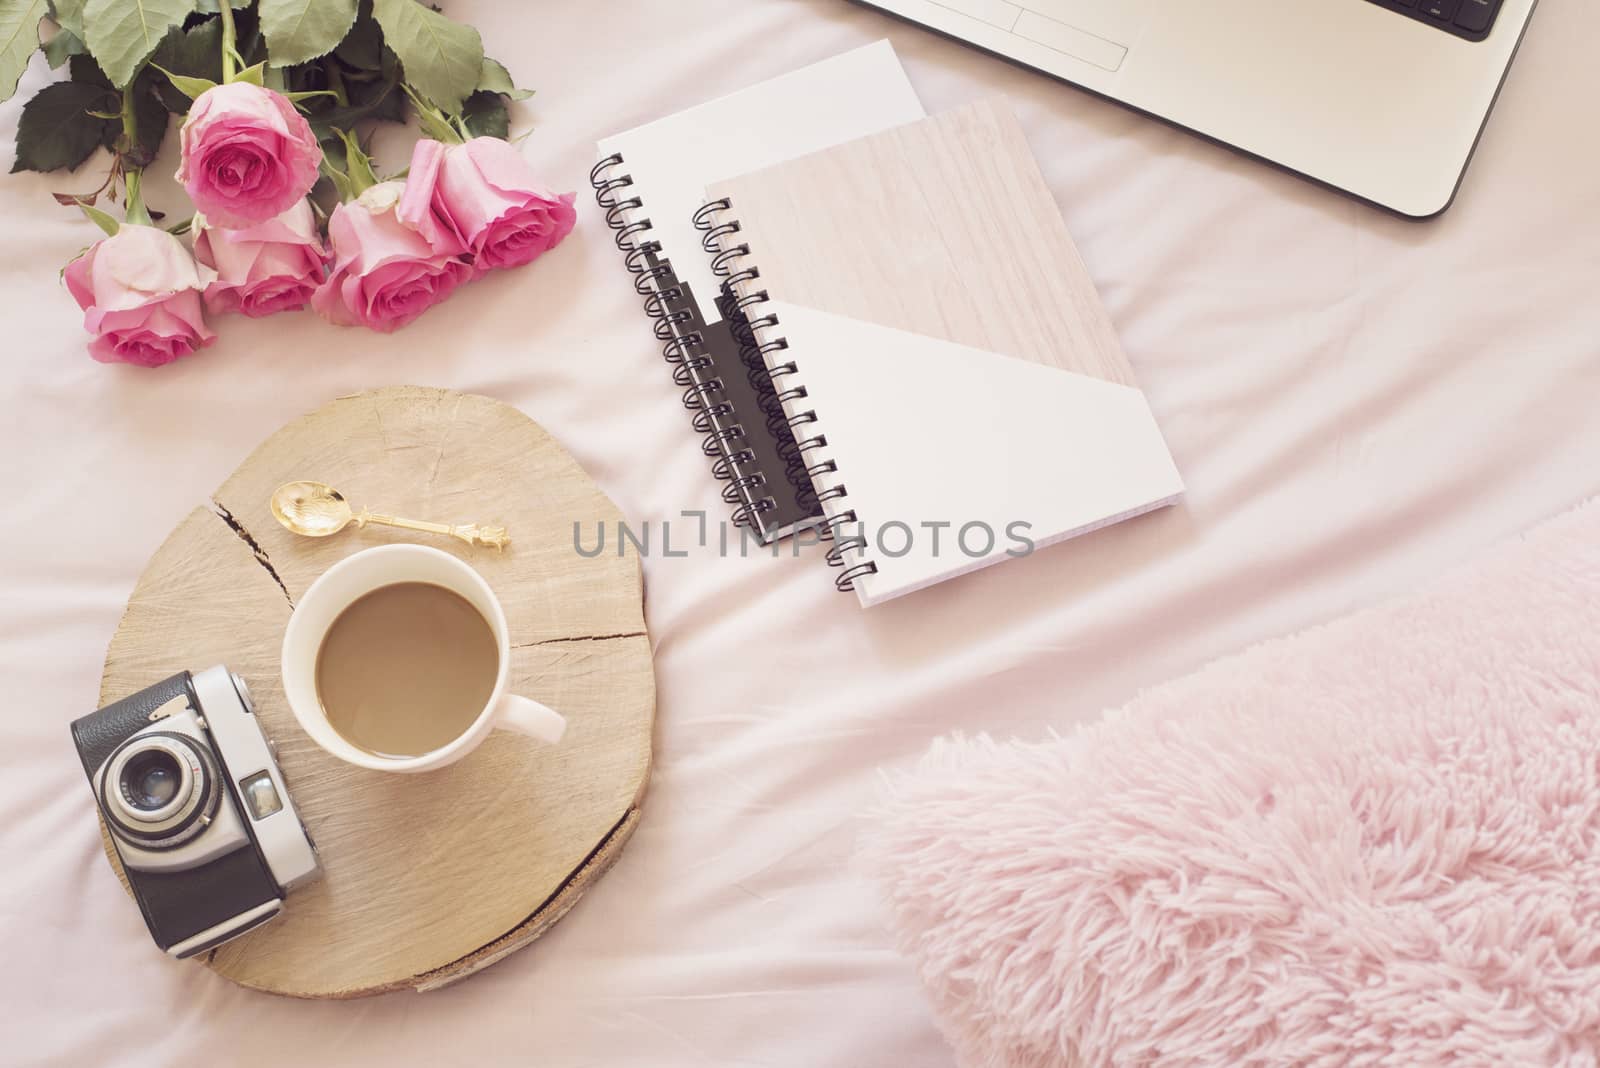 Coffee, old vintage camera in bed on pink sheets. Roses, notebooks and laptop around. Freelance fashion home femininity workspace in flat lay style